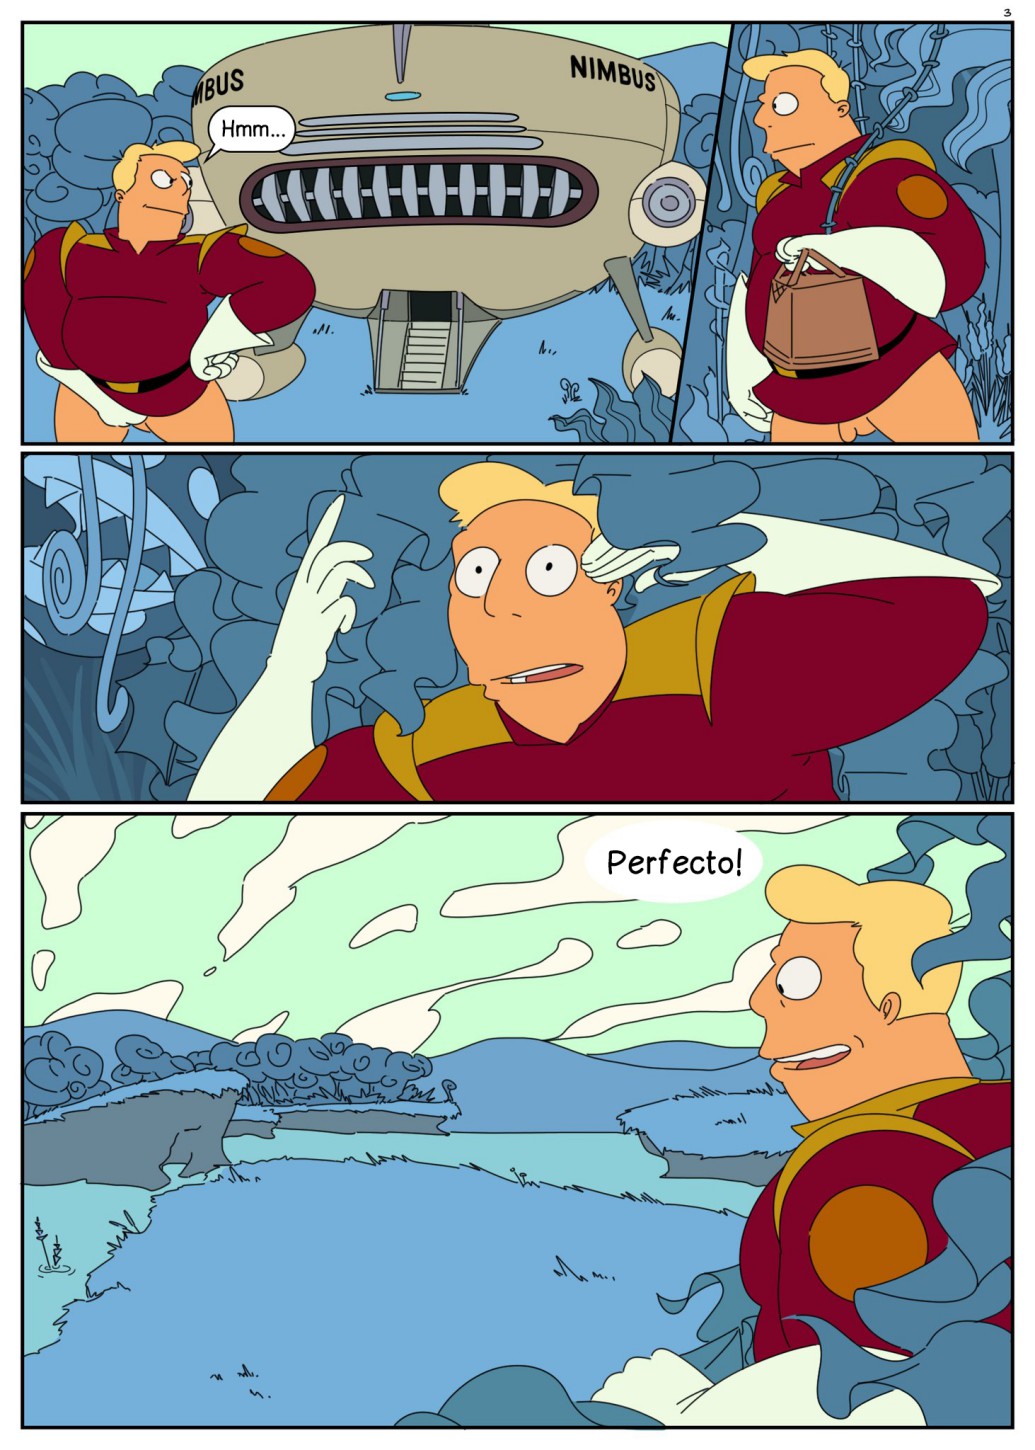 Zapp Brannigan and the Misterious Omicronian image number 3